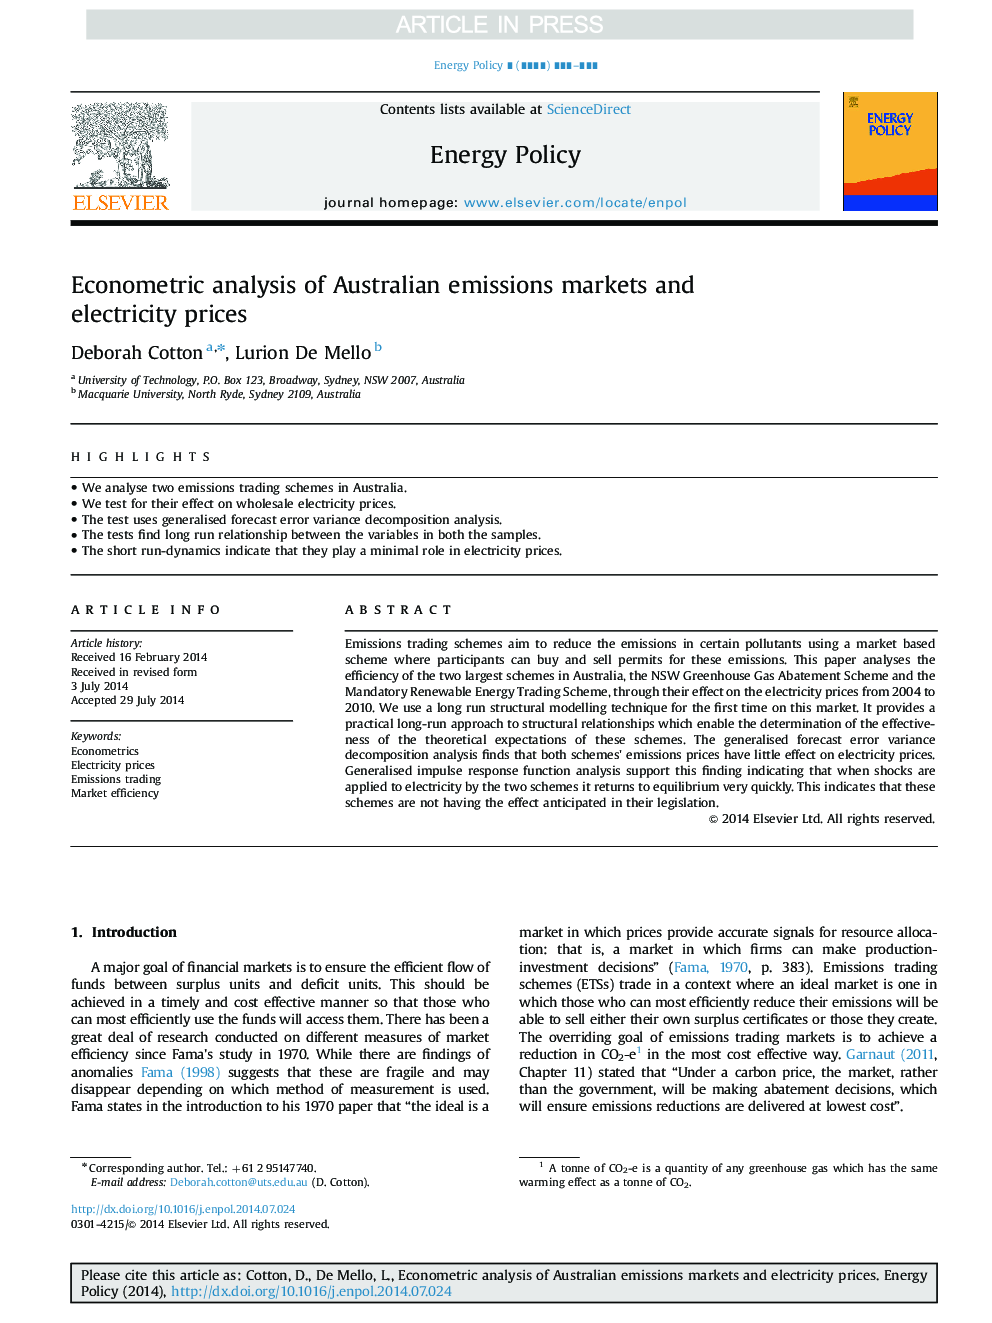 Econometric analysis of Australian emissions markets and electricity prices